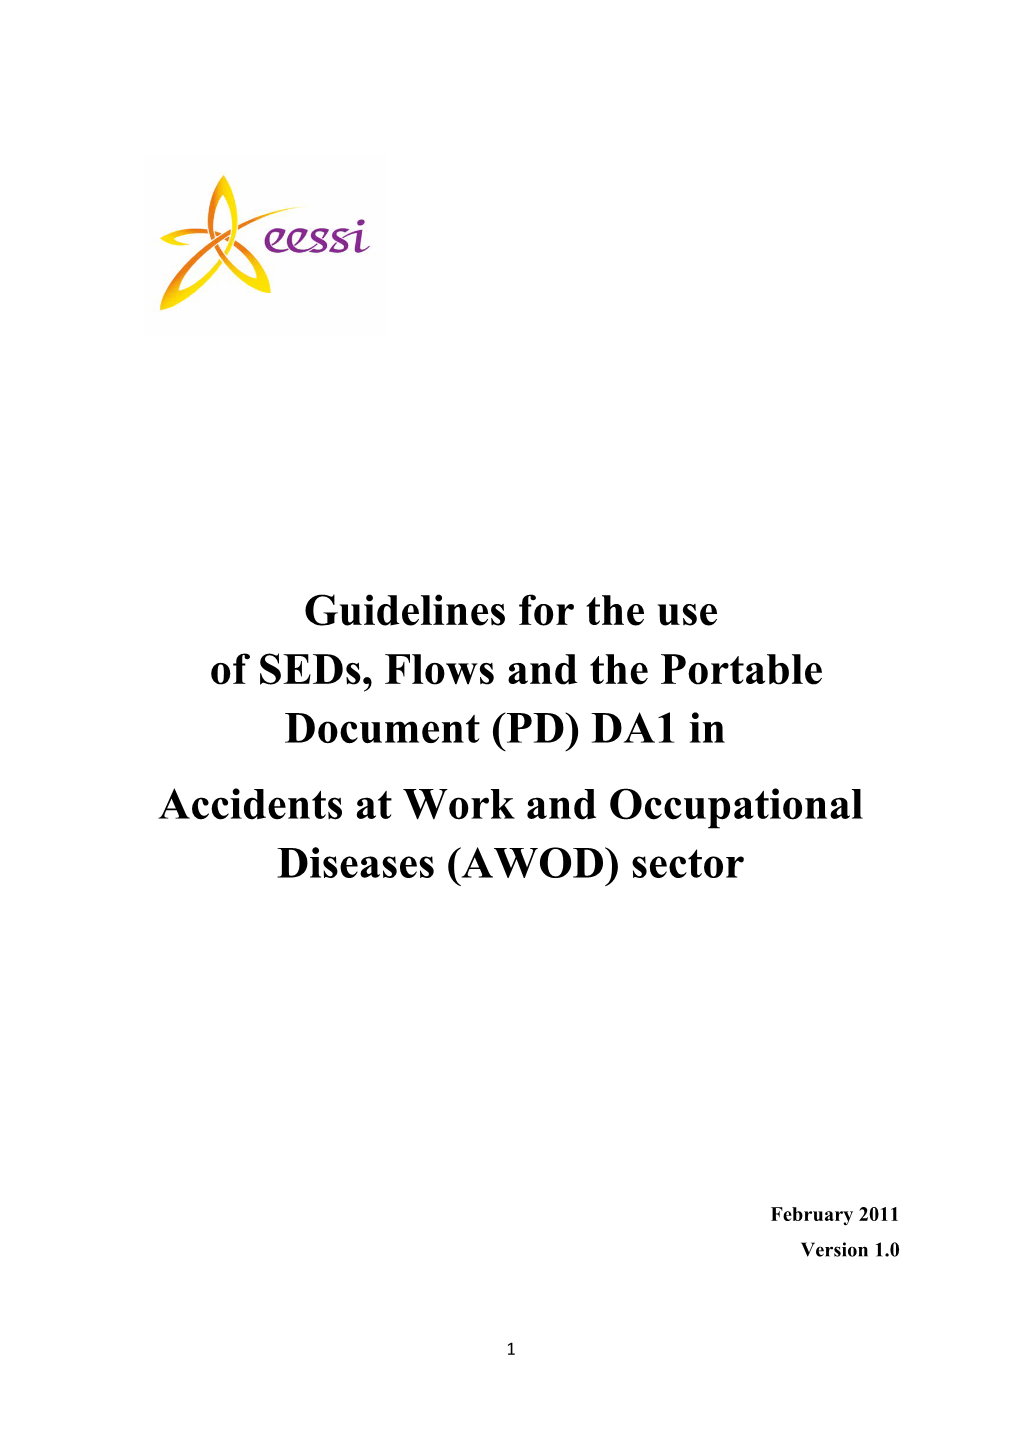 Accidents at Work and Occupational Diseases (AWOD) Sector